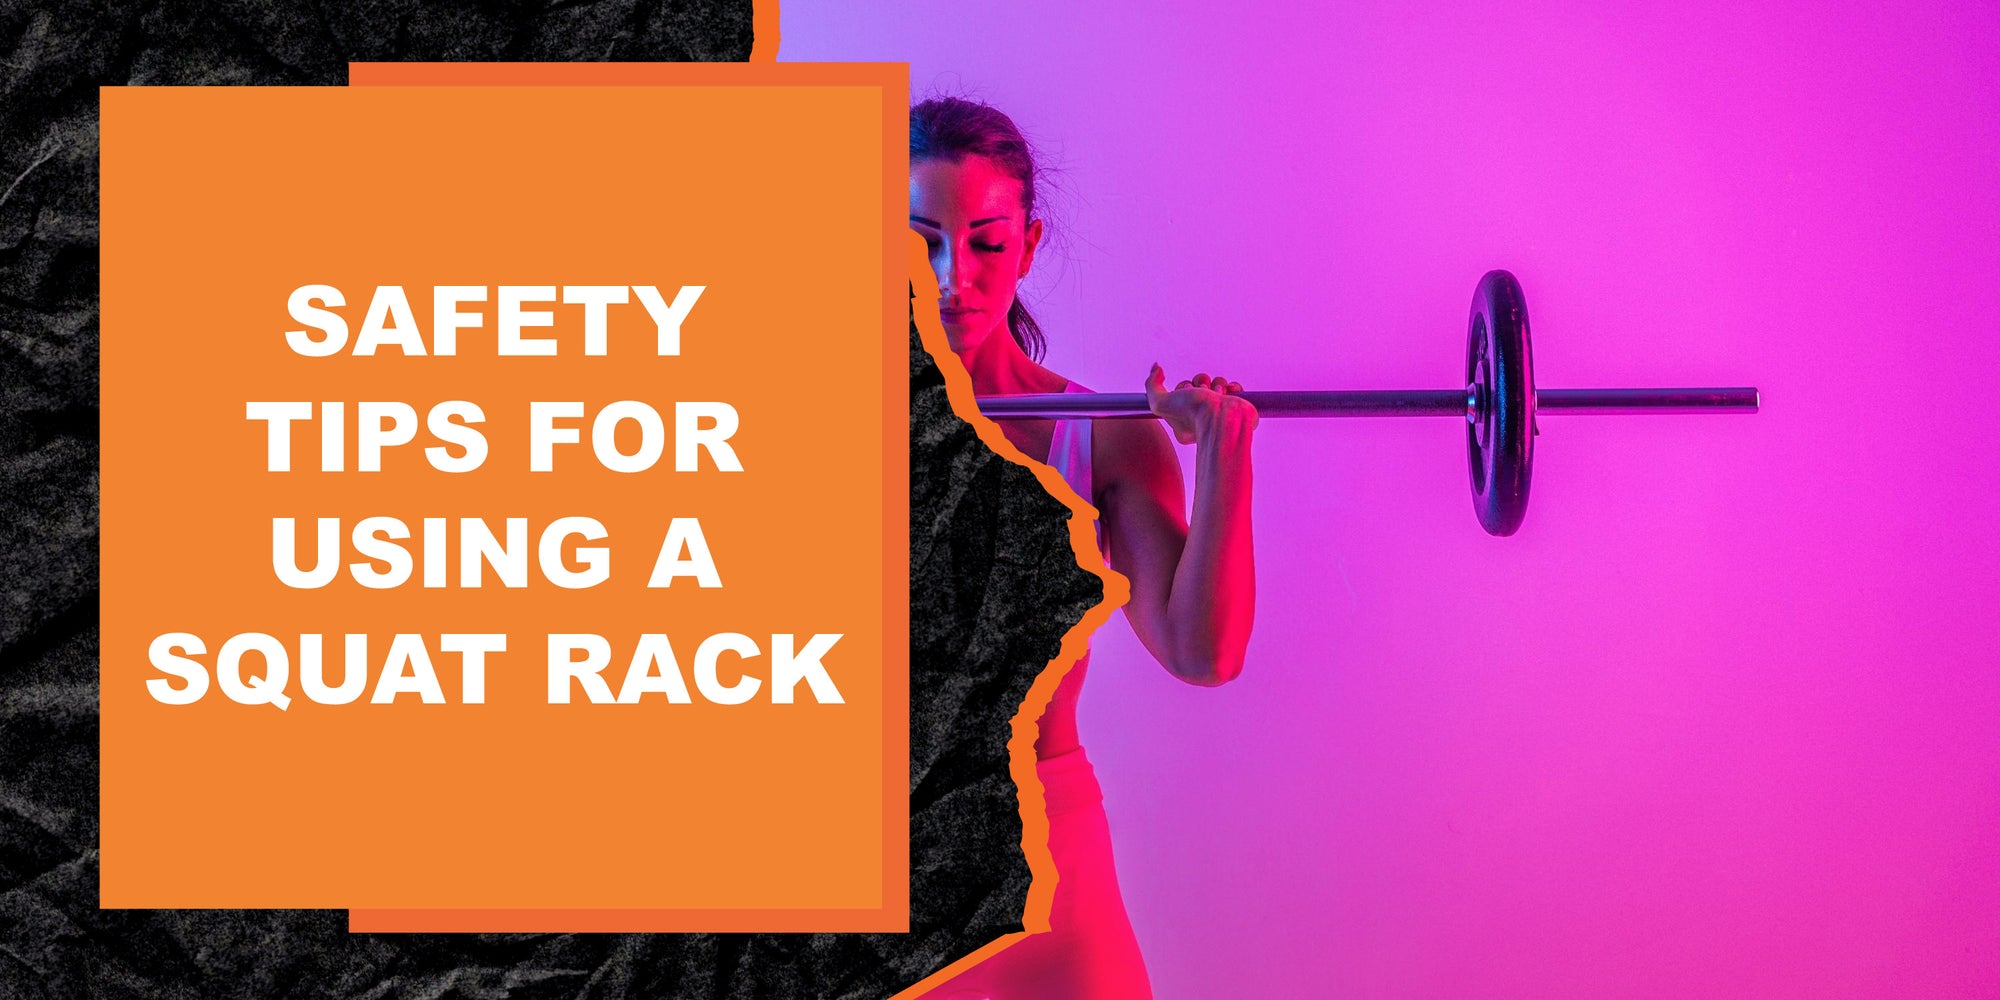 Safety Tips for Using a Squat Rack